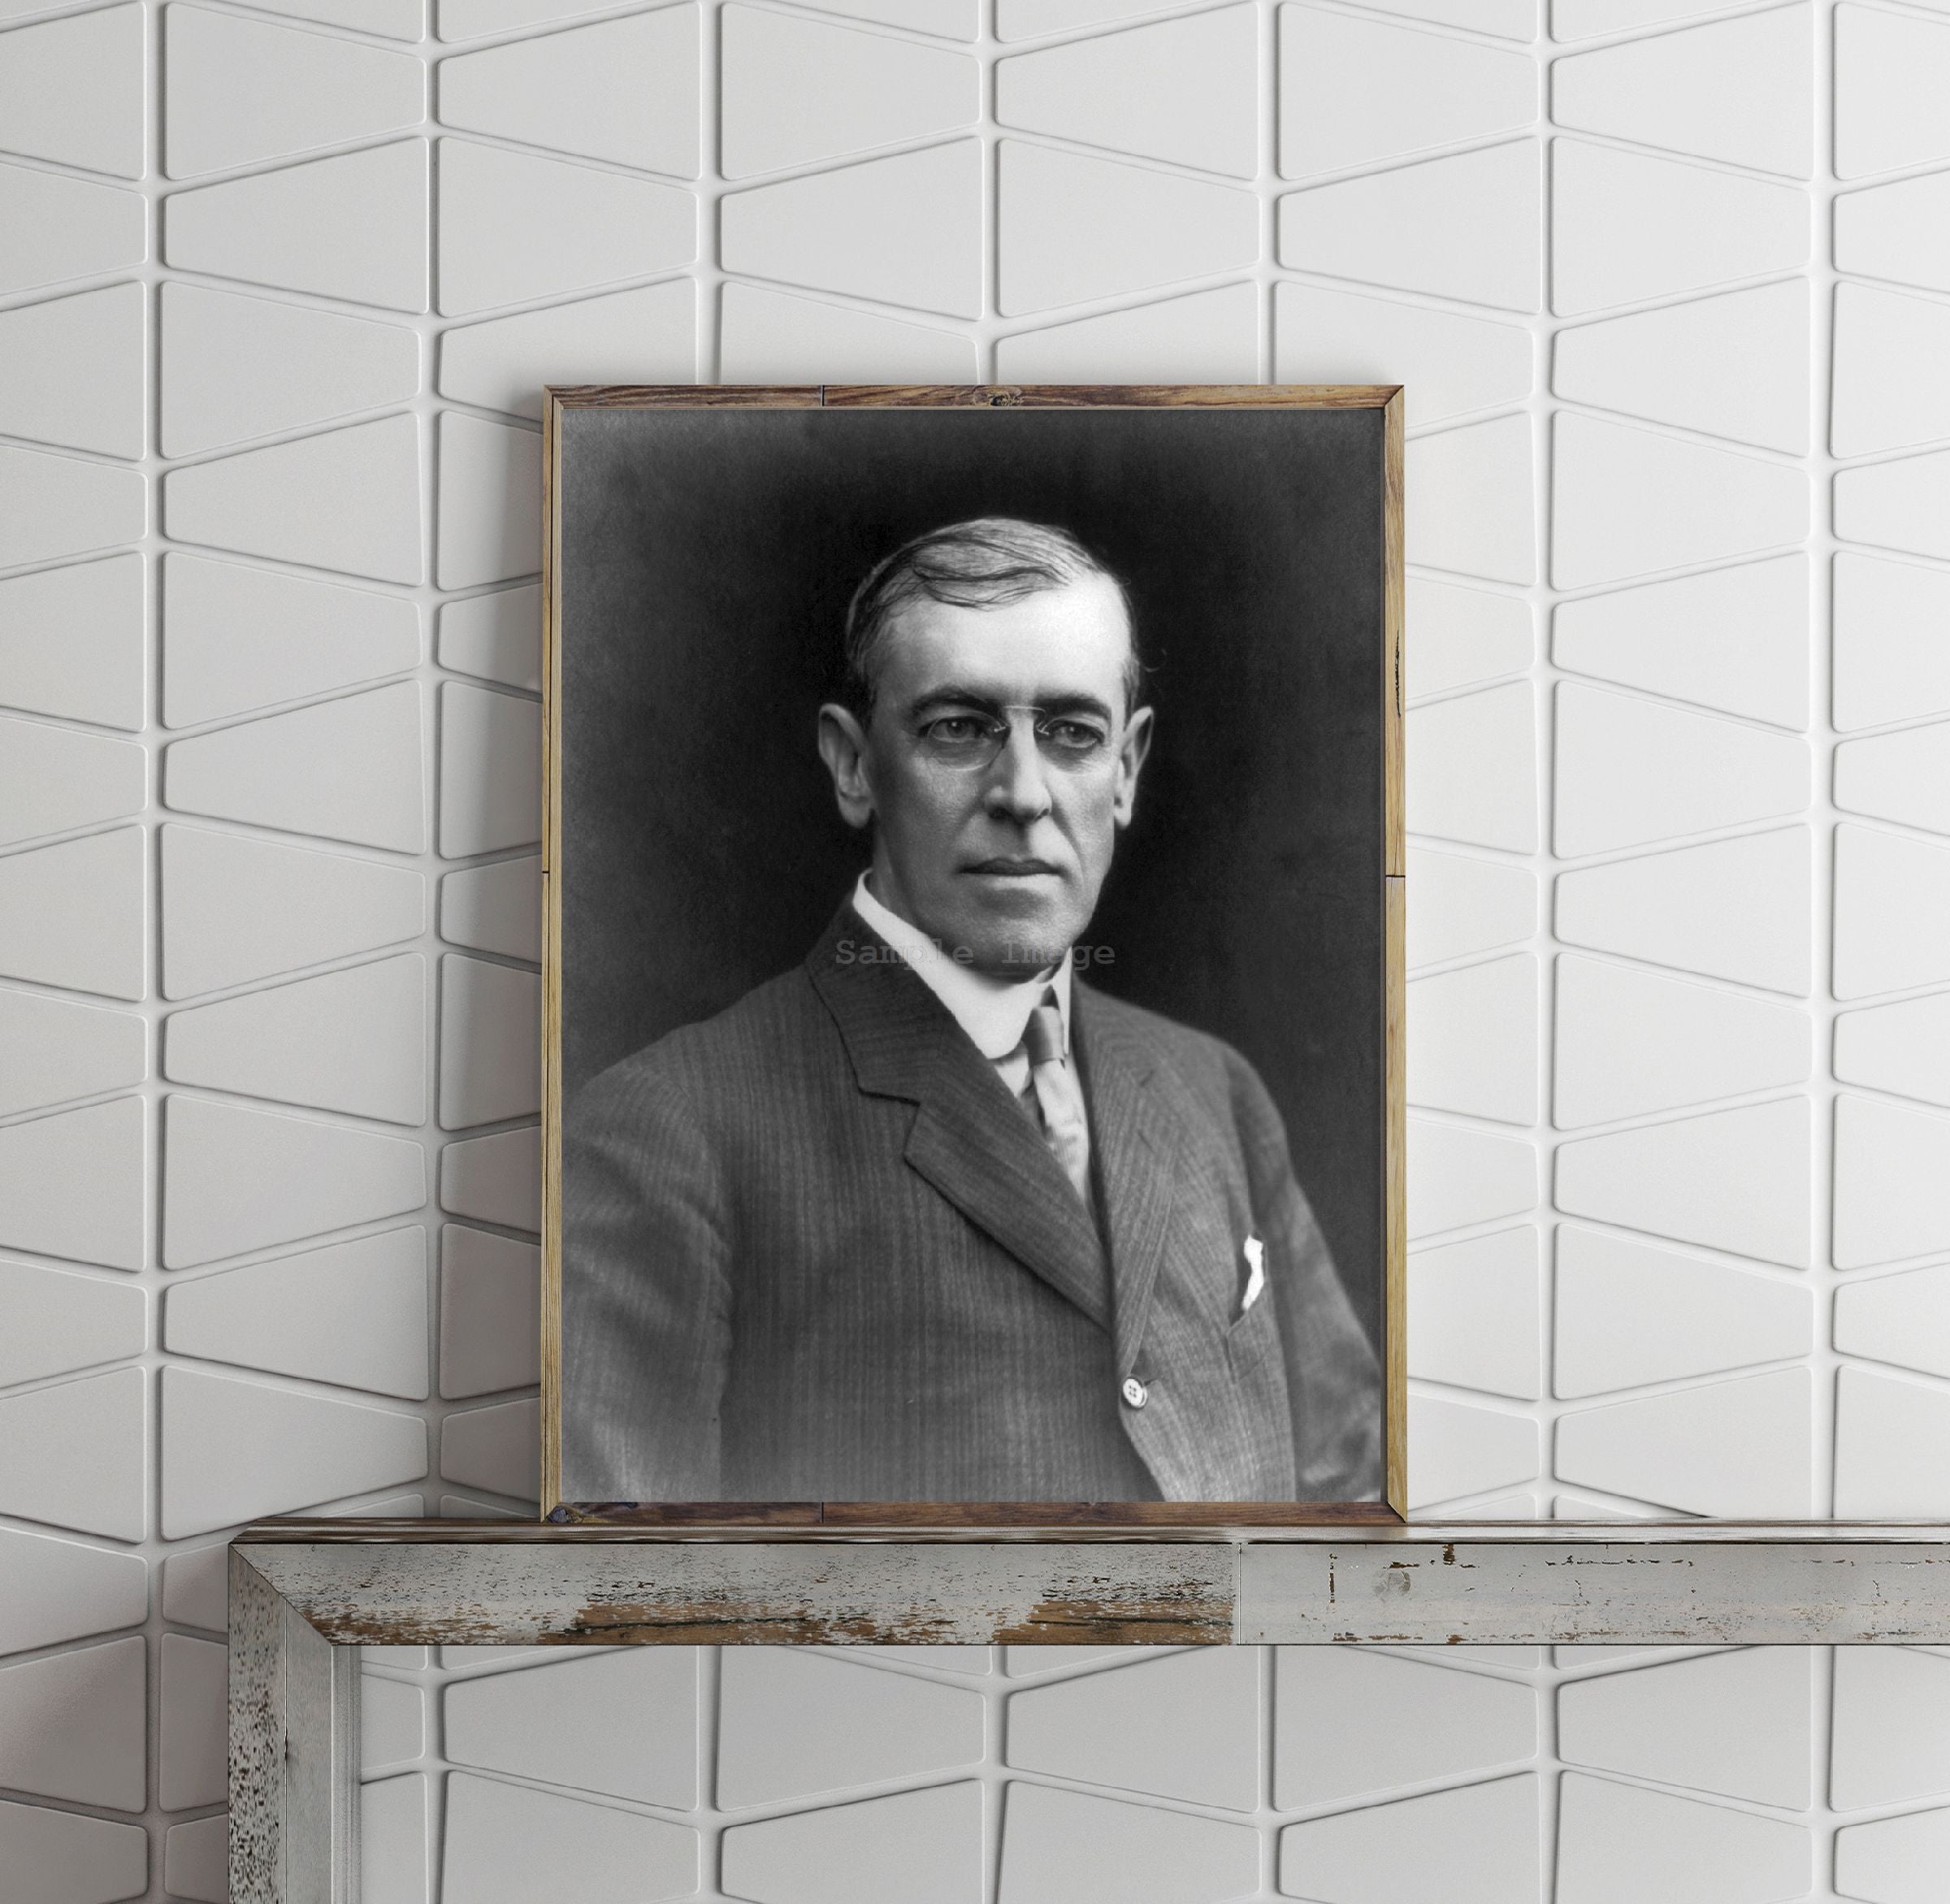 c1910 Oct. 14 photograph of Woodrow Wilson, head and shoulders, facing slightly